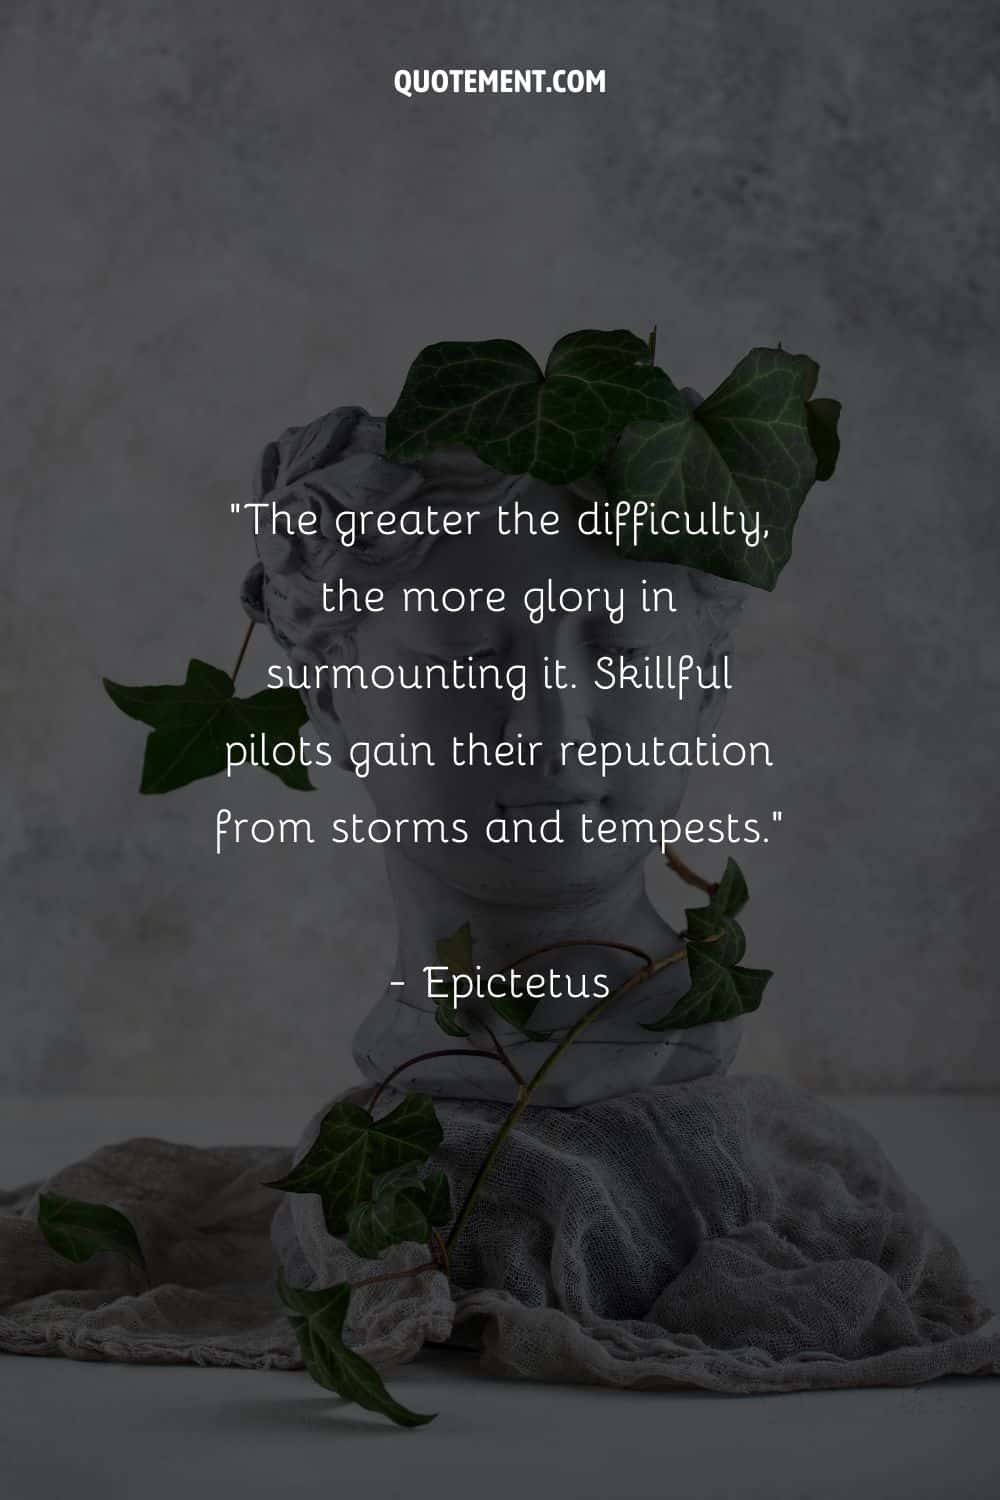 The greater the difficulty, the more glory in surmounting it. Skillful pilots gain their reputation from storms and tempests.